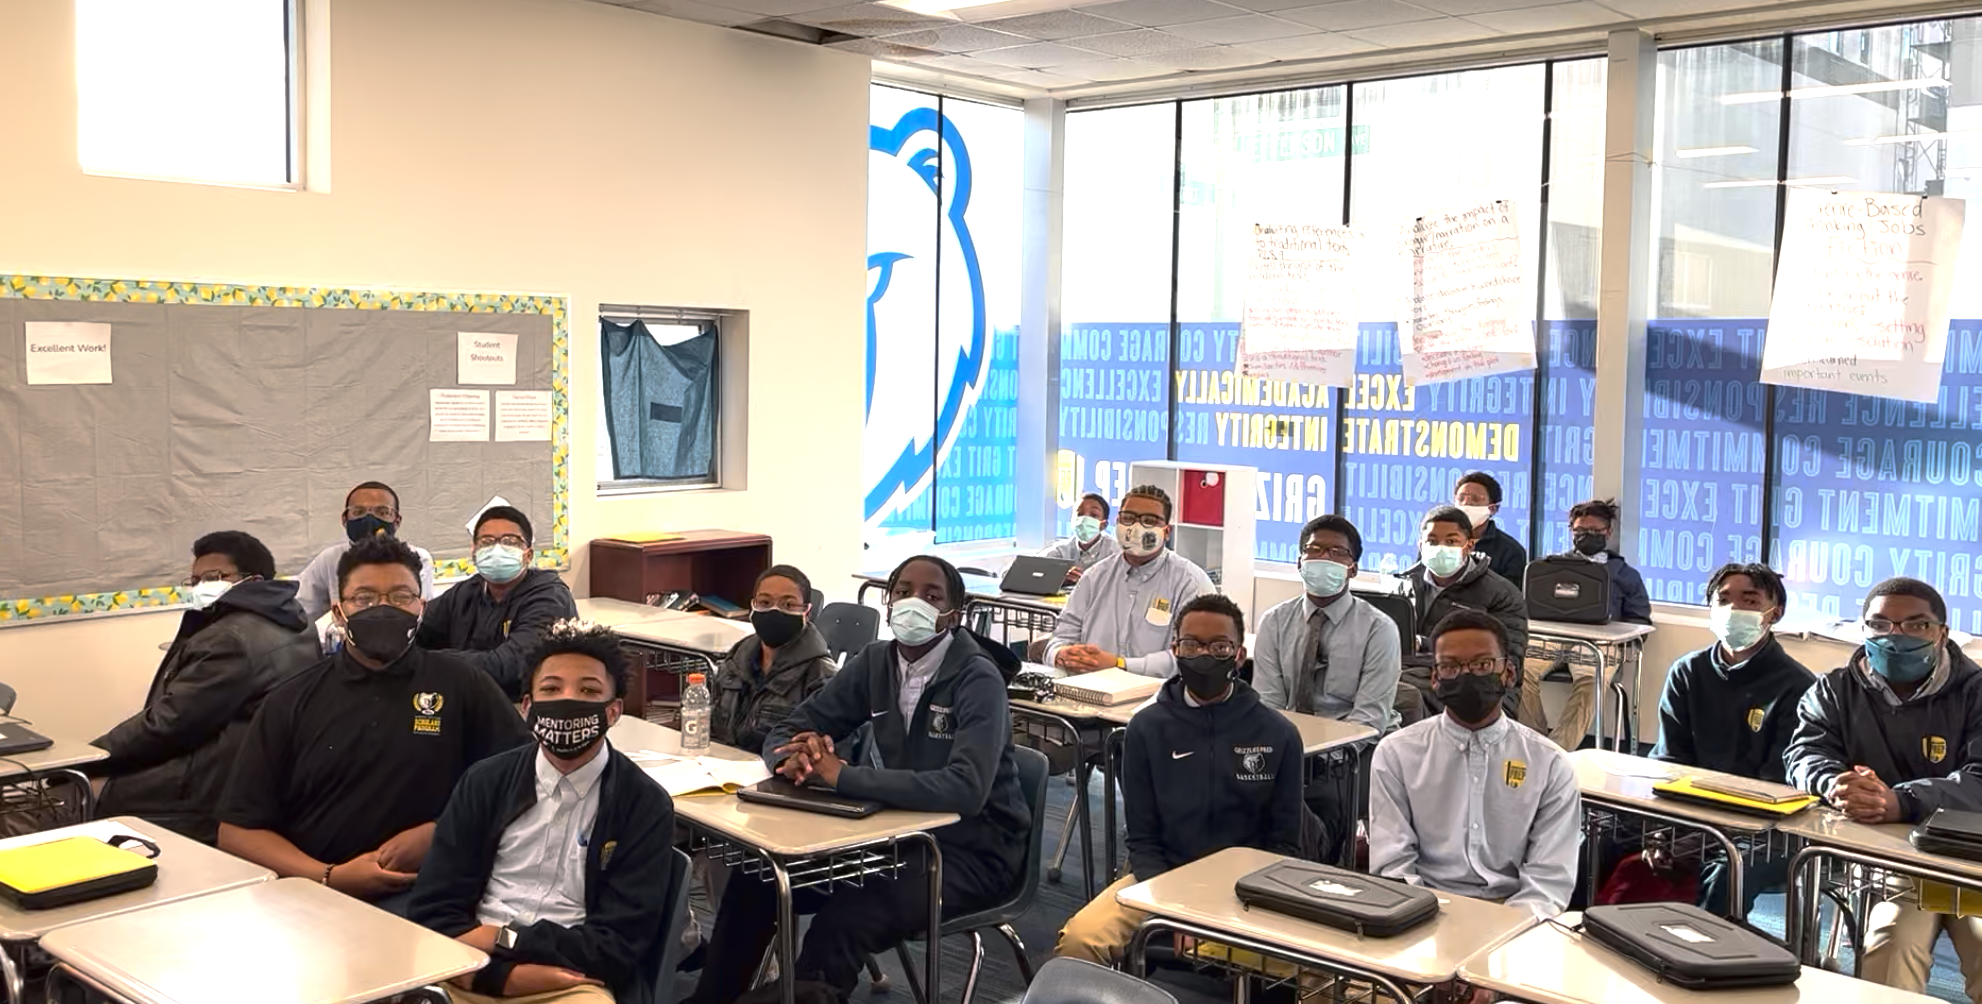 A group of students in a classroom wearing face masks.